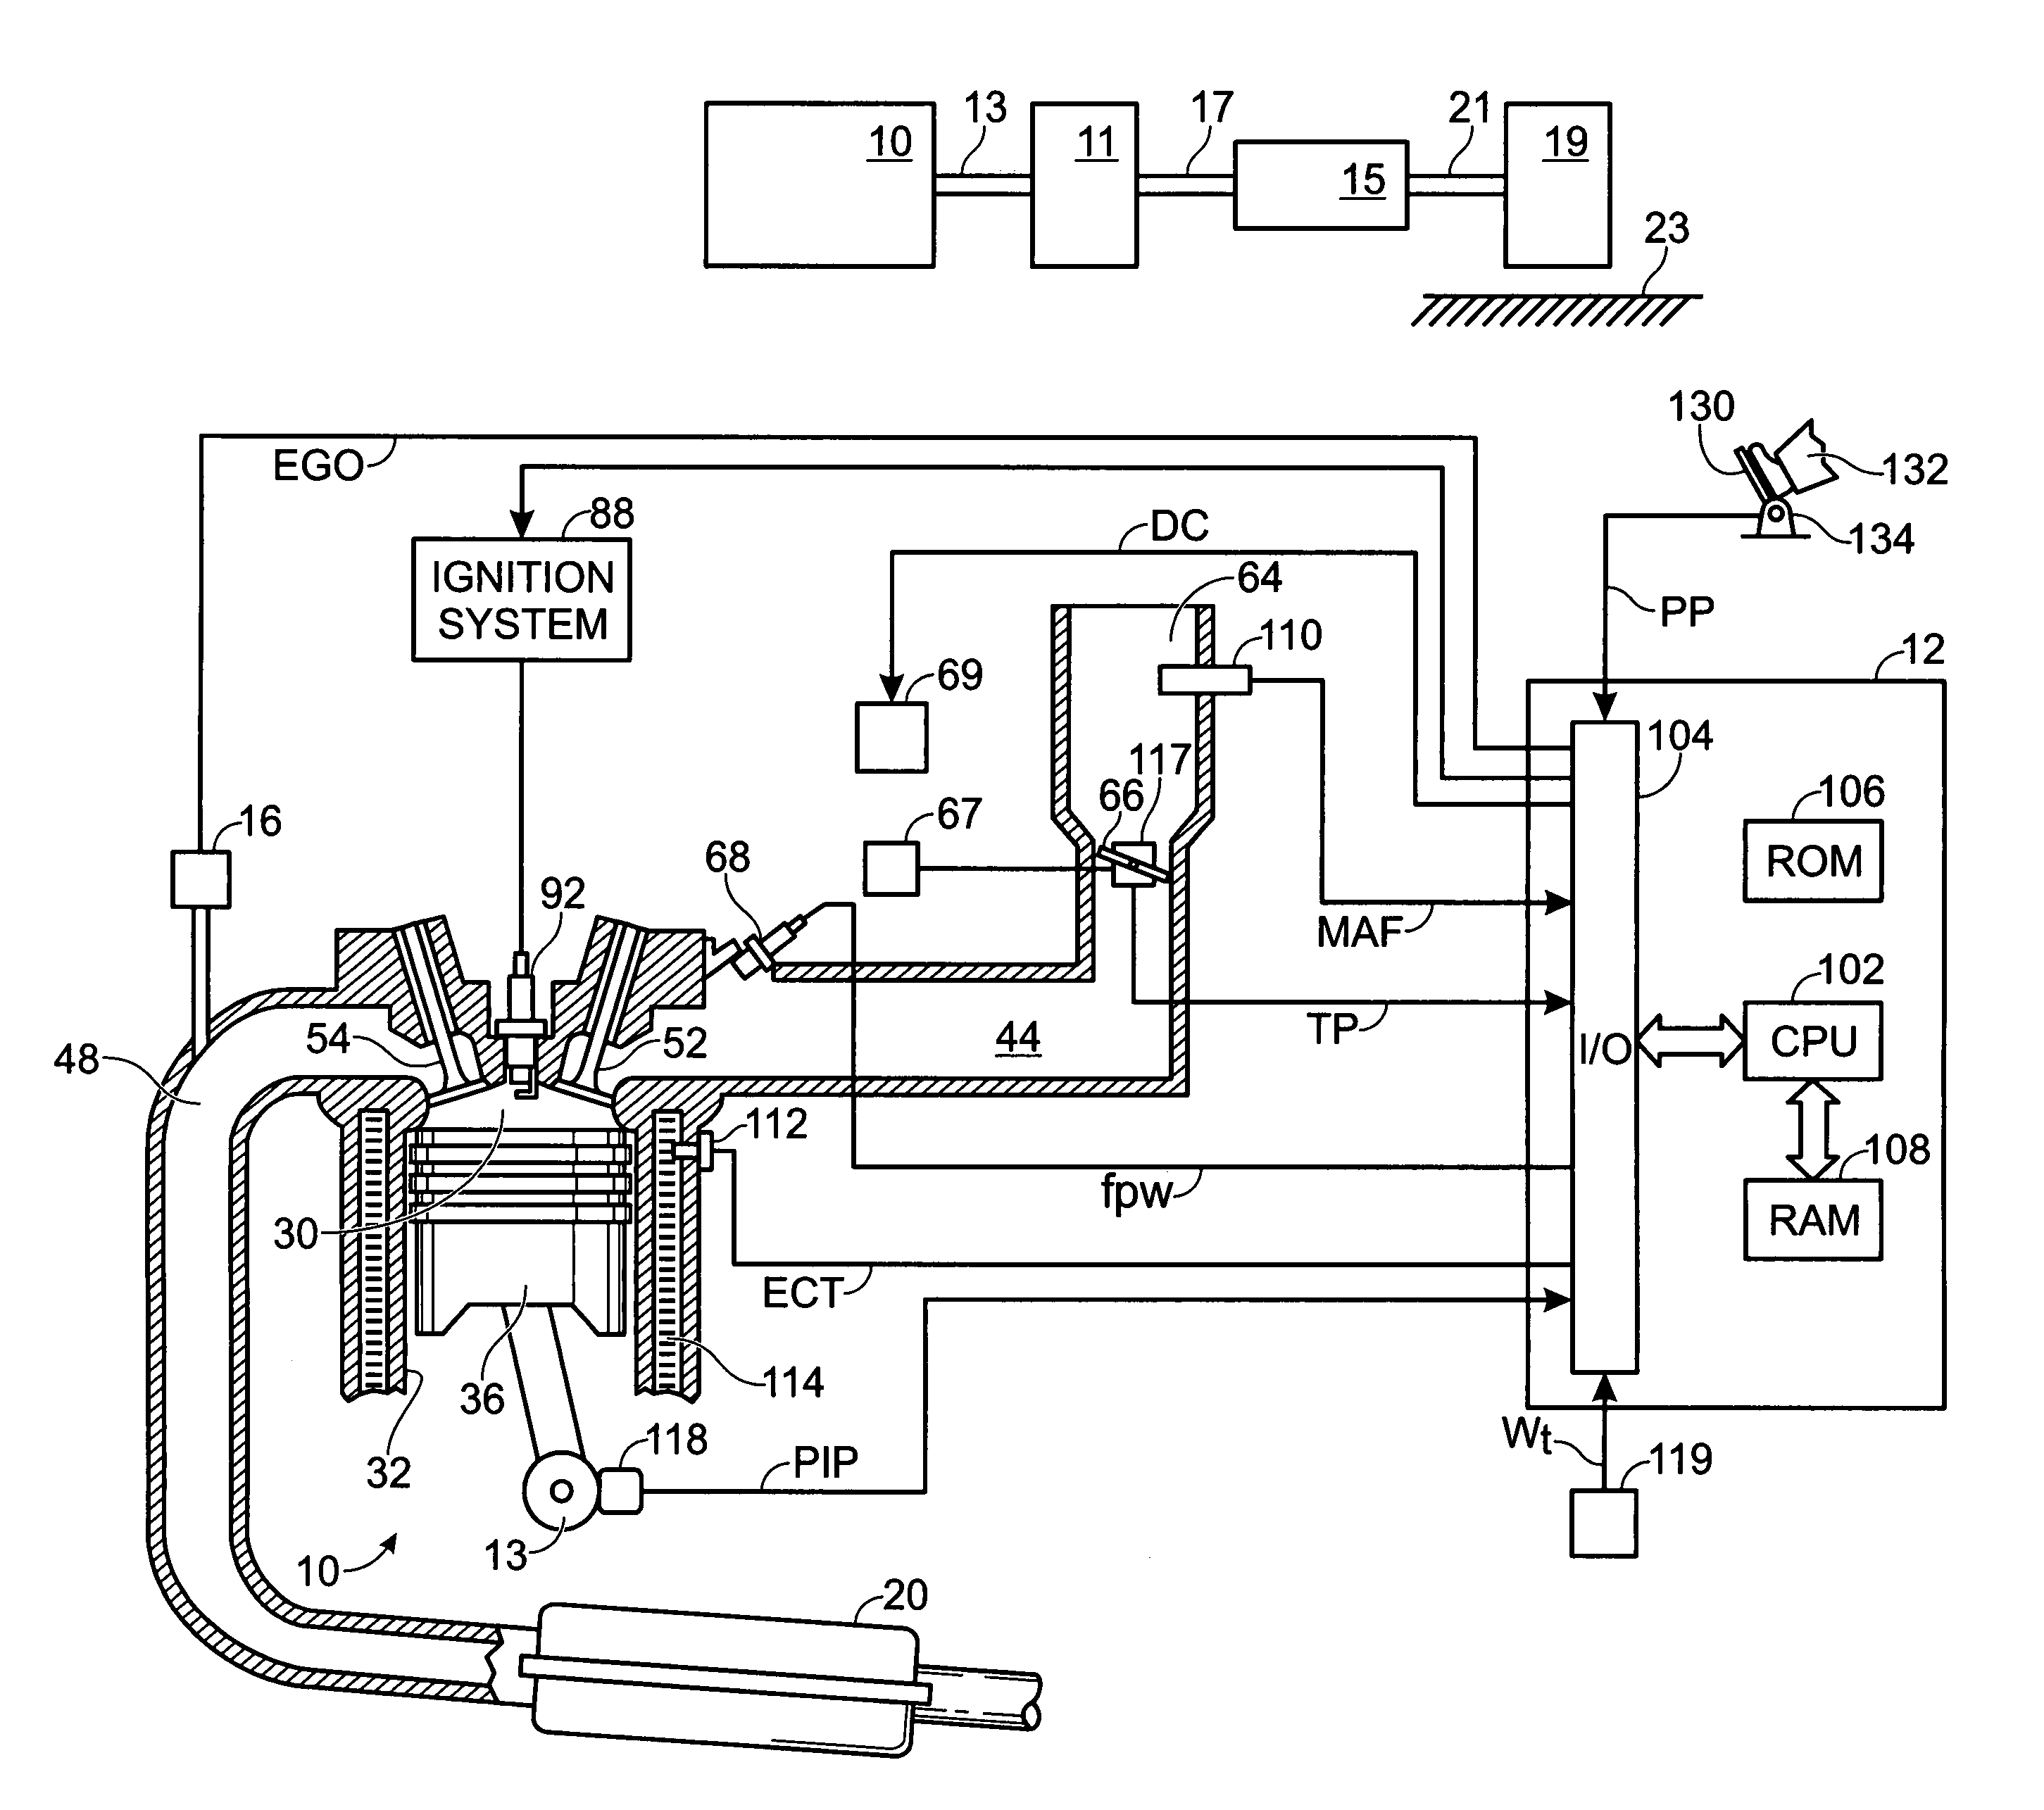 Computer device to calculate emission control device functionality